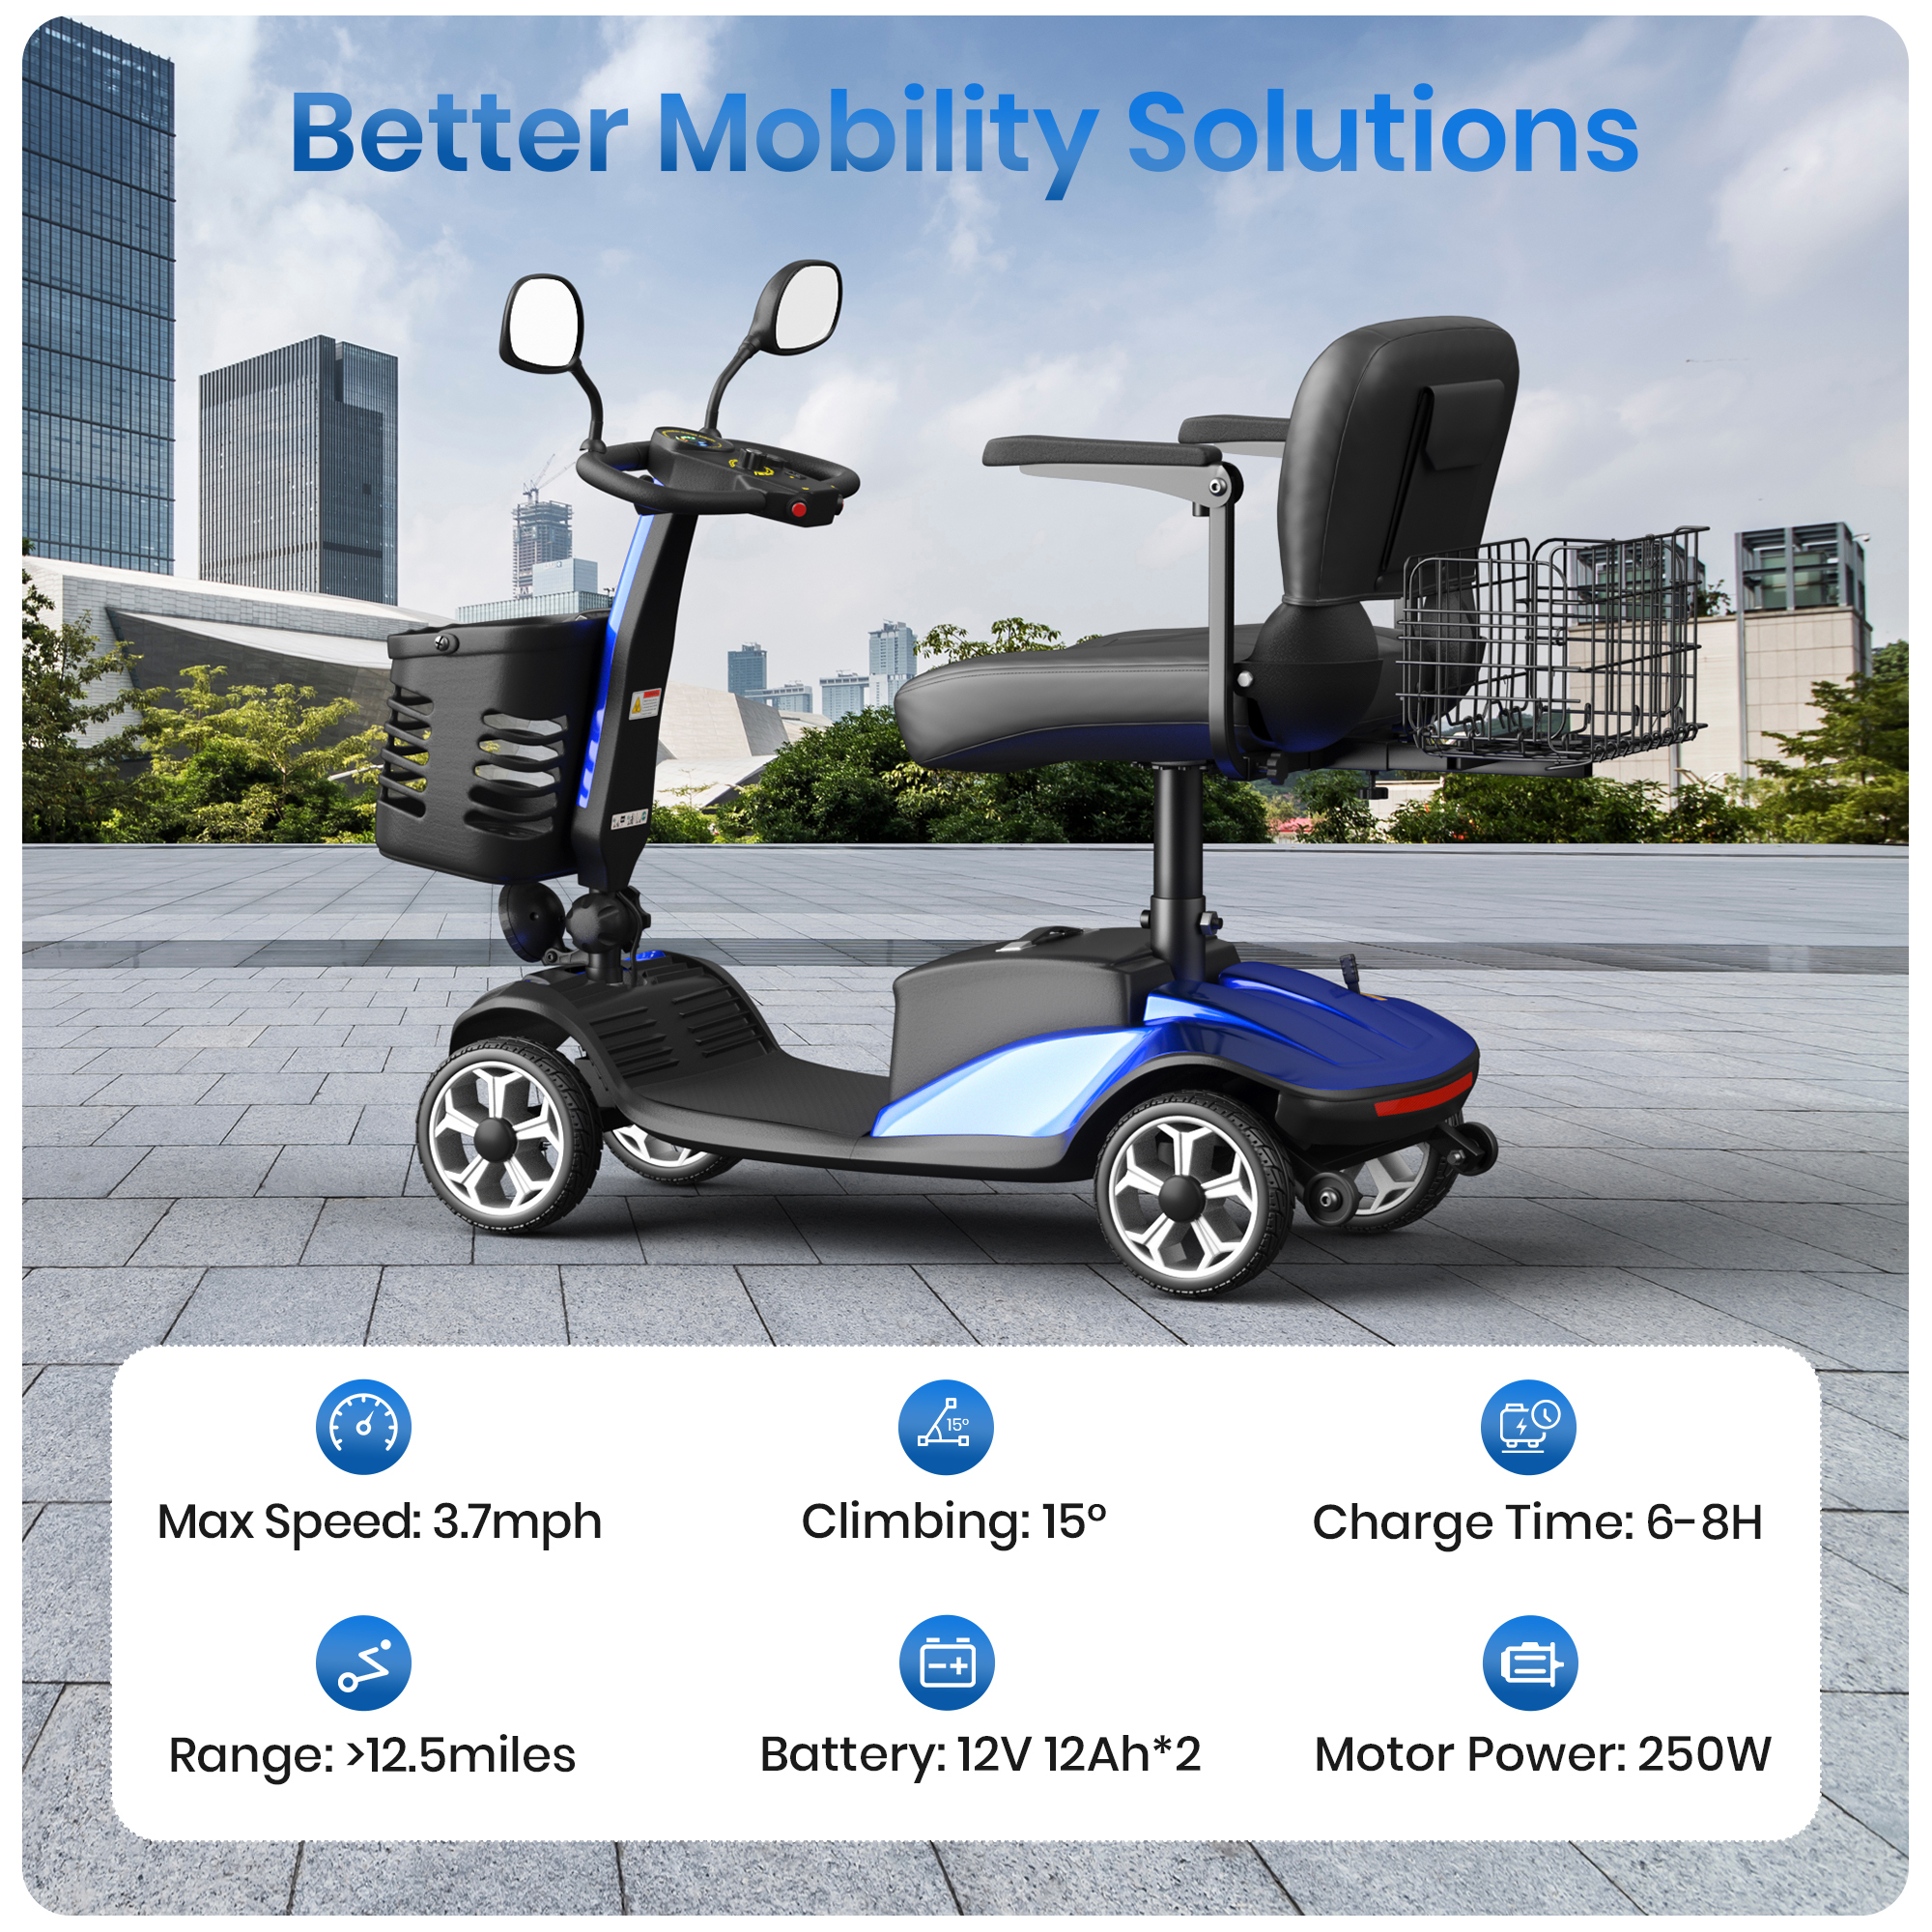 SACVON Upgrade 4 Wheel Mobility Scooter for Seniors, Foldable Powered Mobile Wheelchair for Adult 330lbs, Blue - image 2 of 10